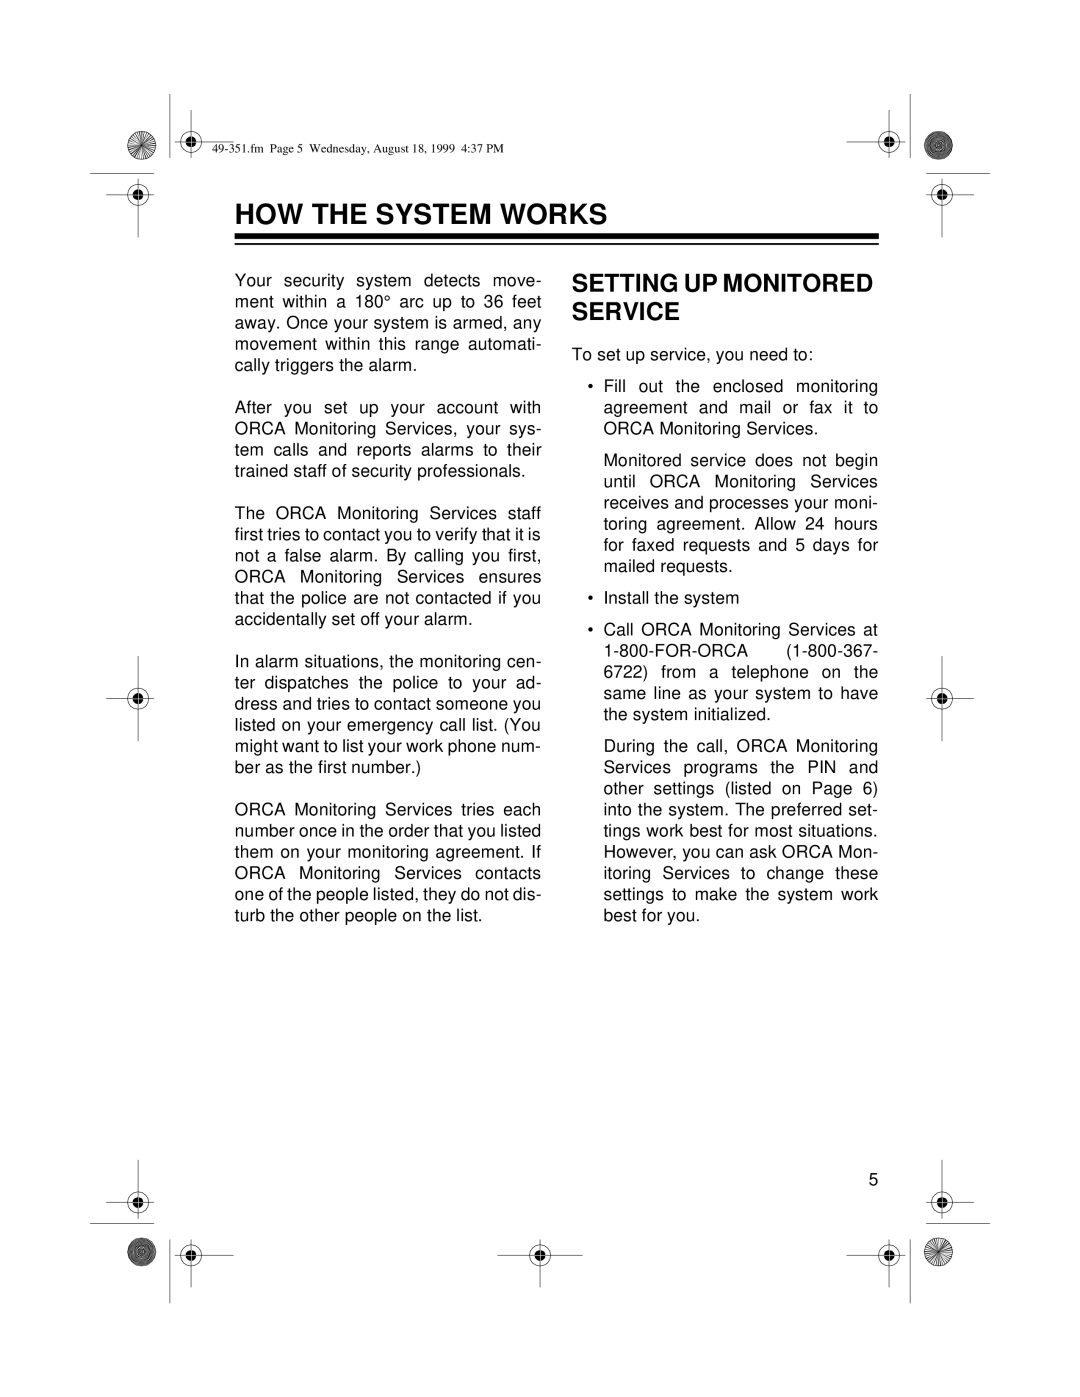 Radio Shack 49-351 owner manual How The System Works, Setting Up Monitored Service 